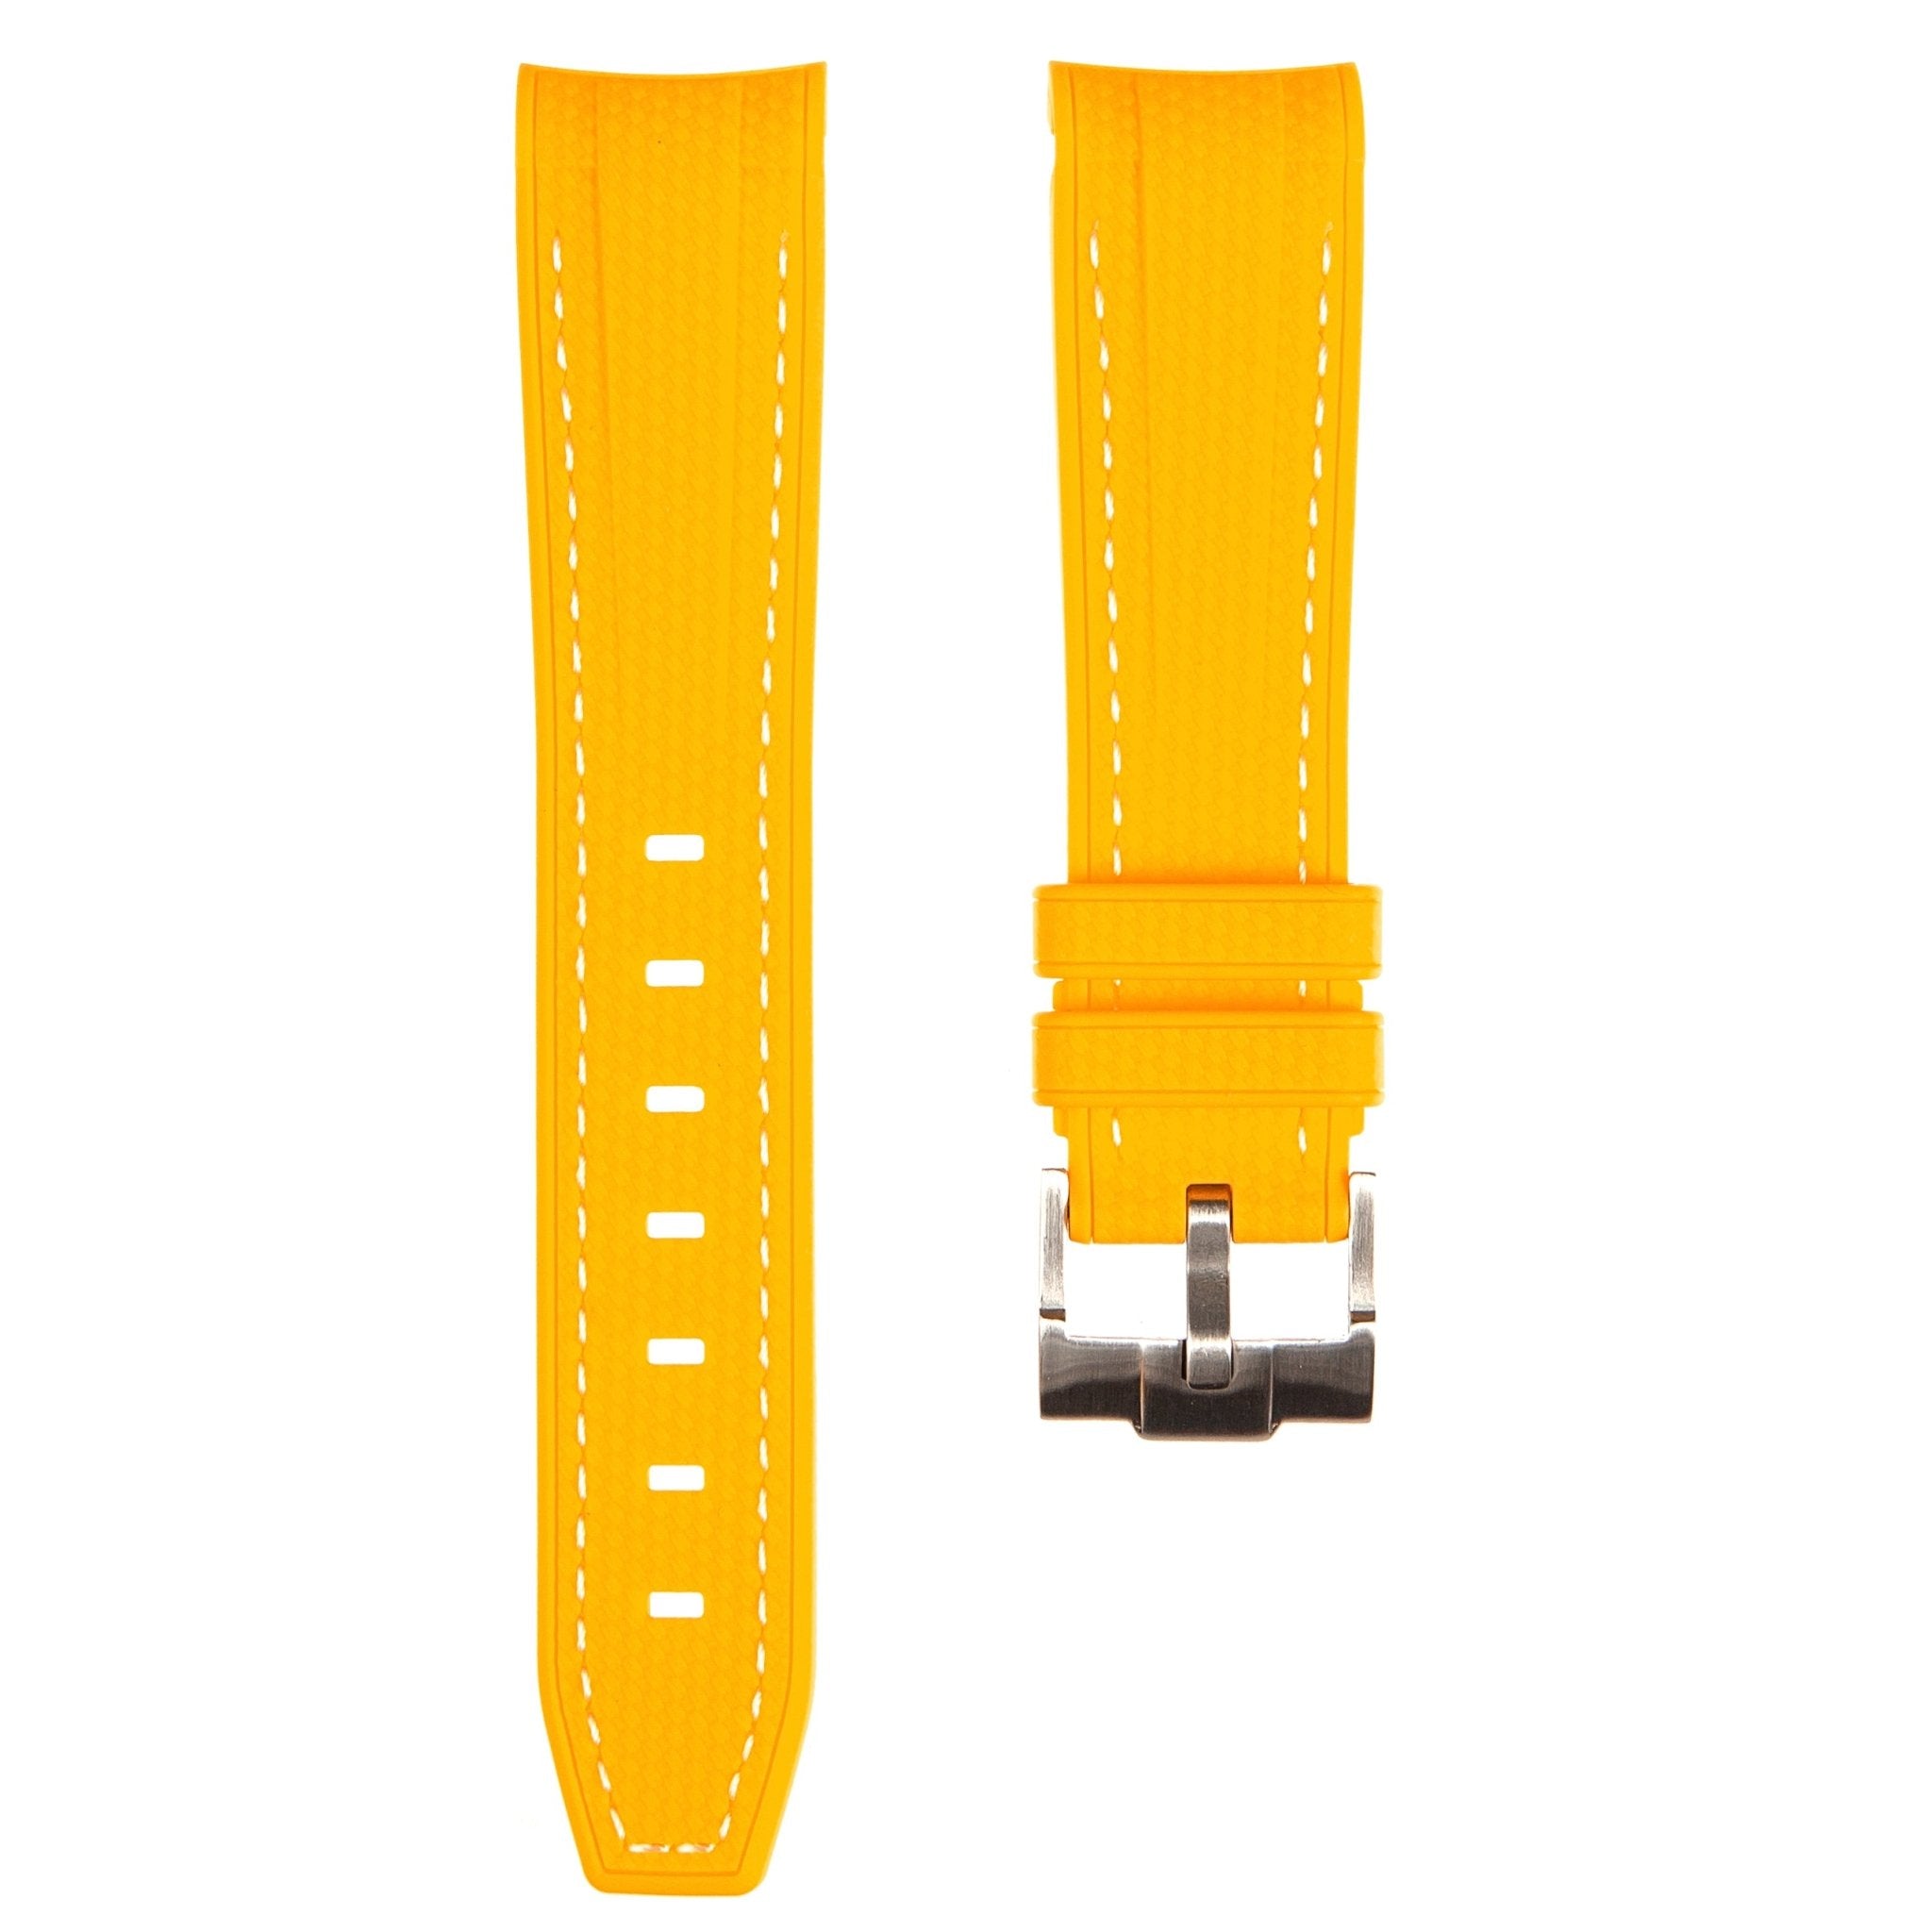 Textured Curved End Premium Silicone Strap – Compatible with Rolex Submariner – Yellow with White Stitch (2405) -StrapSeeker